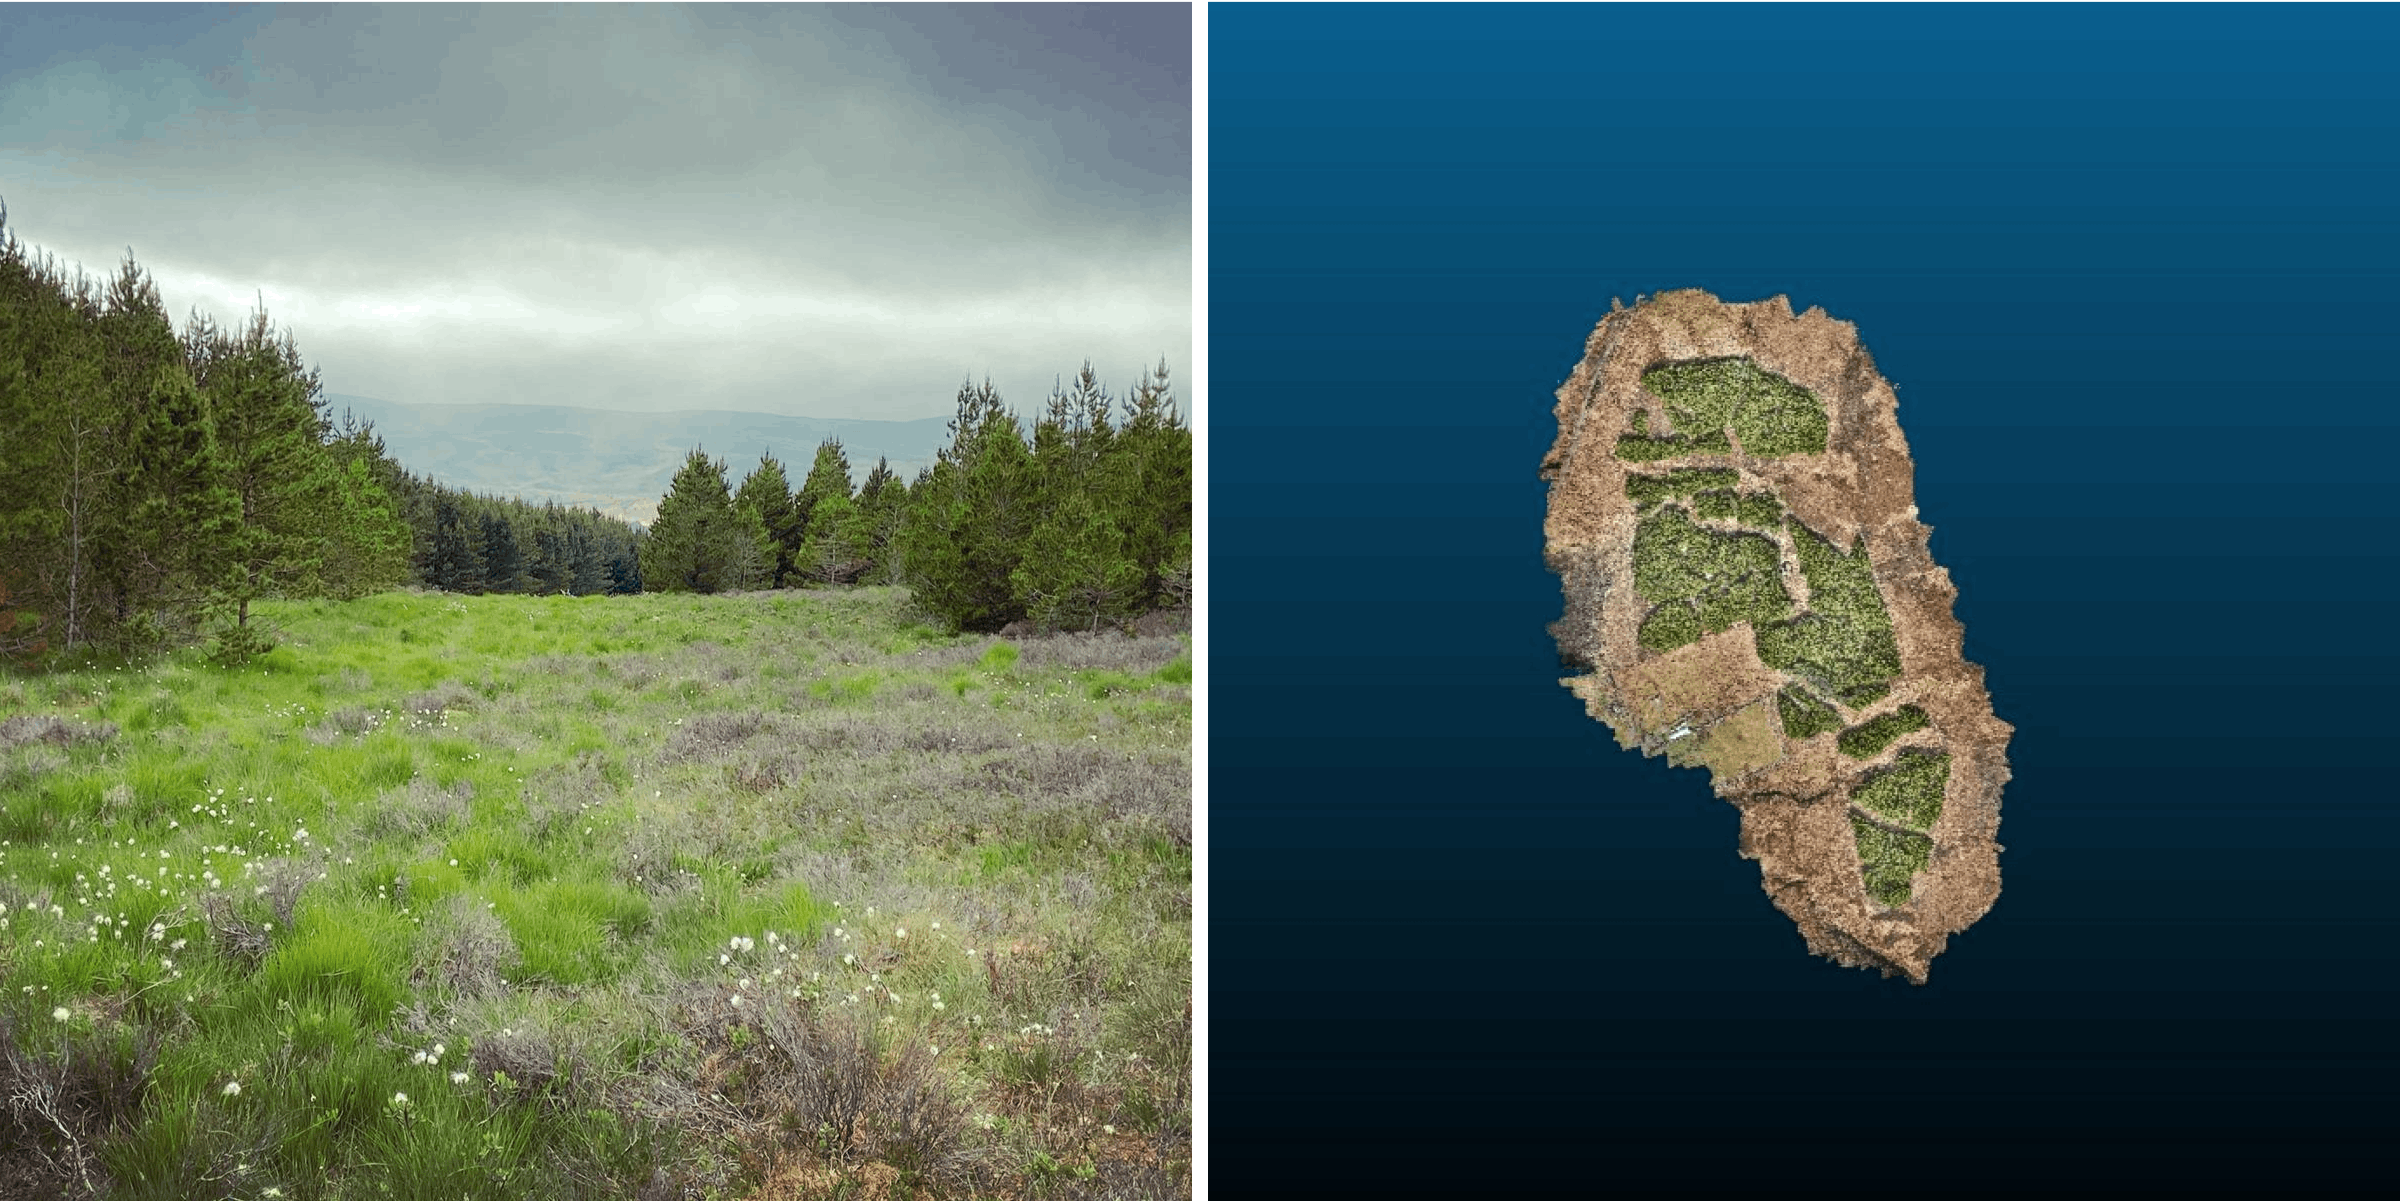 Left-hand photograph: the Ackron Mixed forest. Right-hand photograph: satellite monitoring of the Ackron Mixed forest.